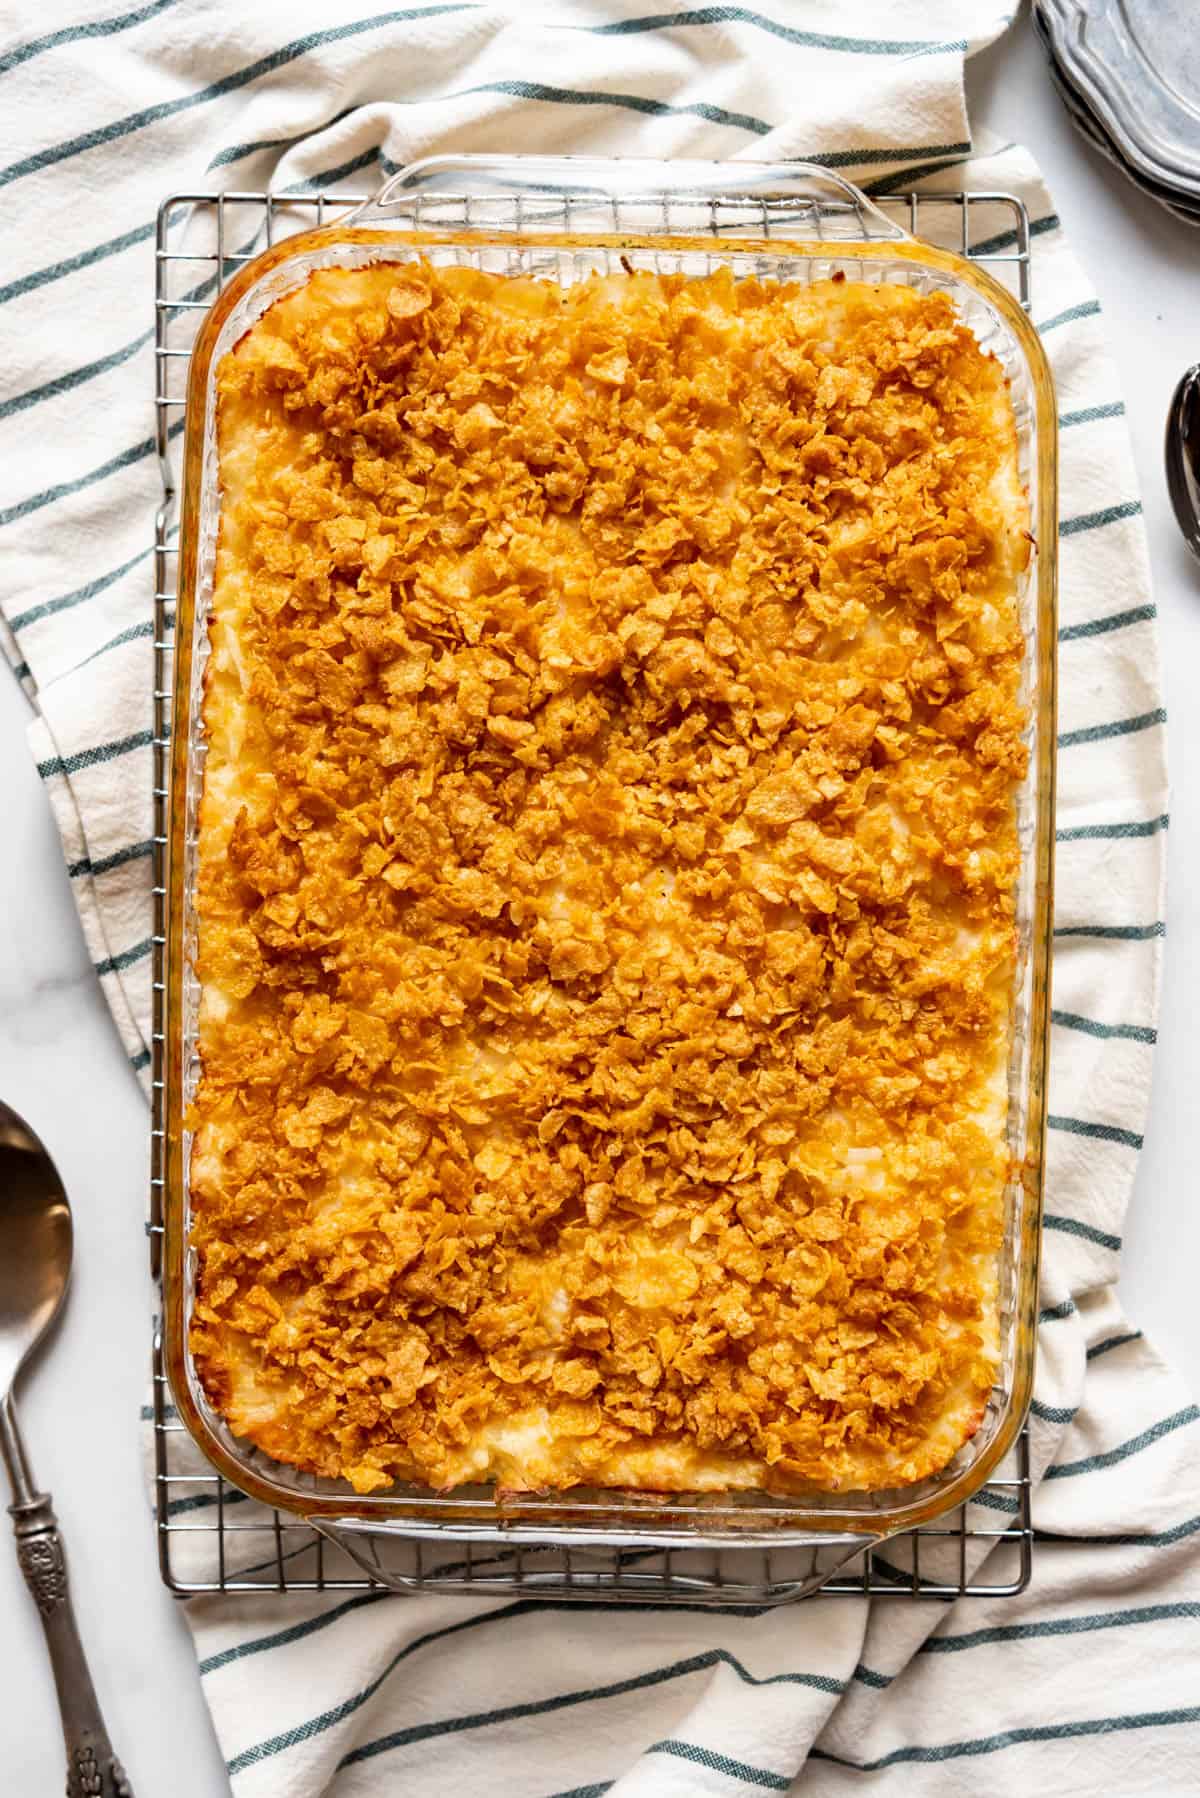 A large baking dish of funeral potatoes.